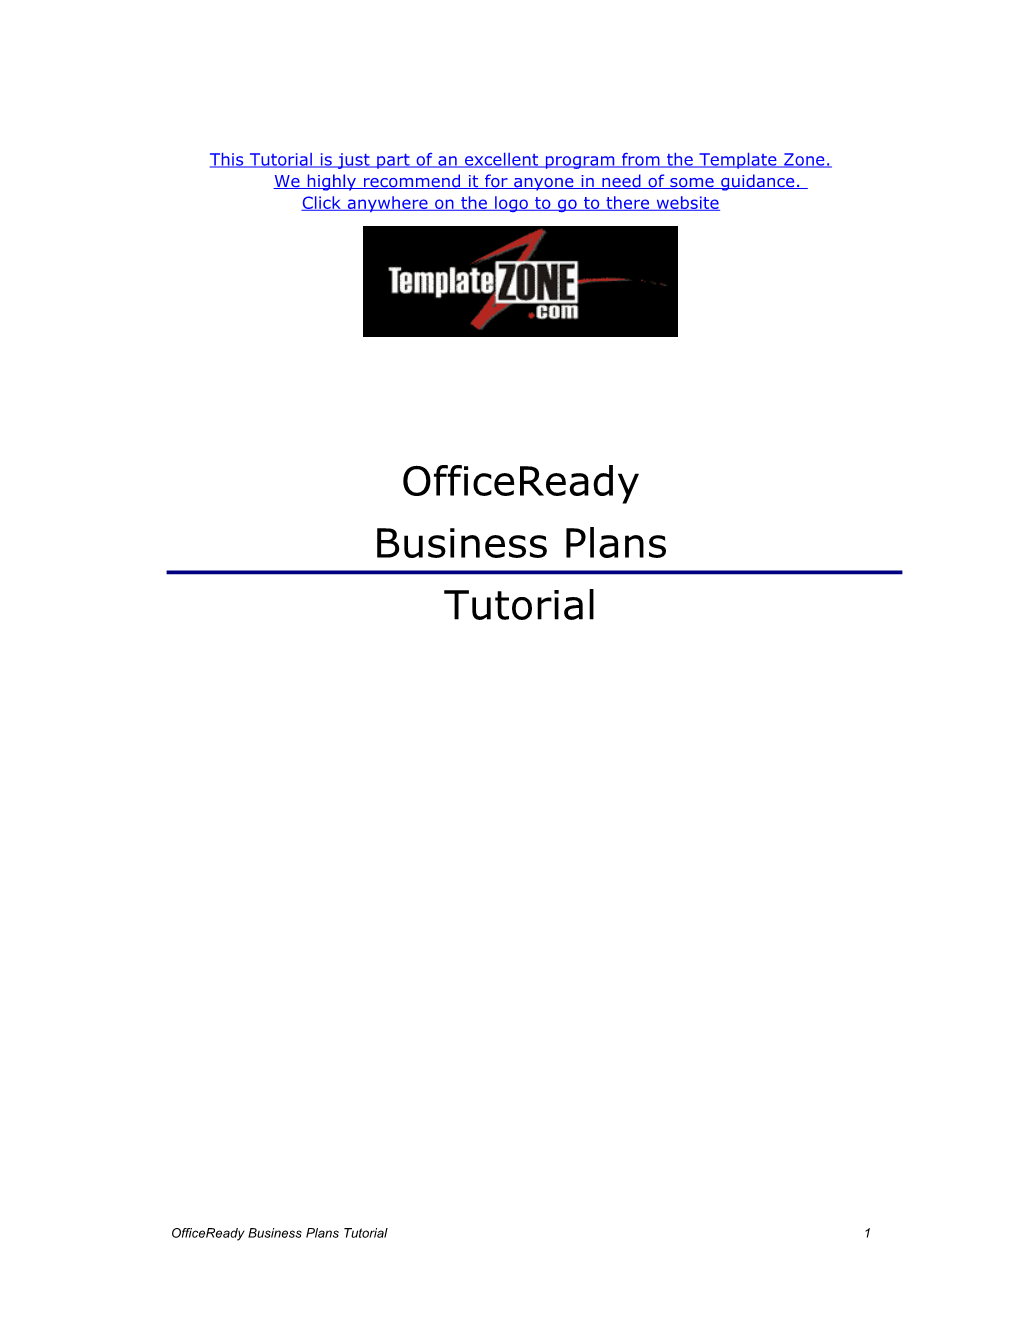 Officeready Business Plans Tutorial